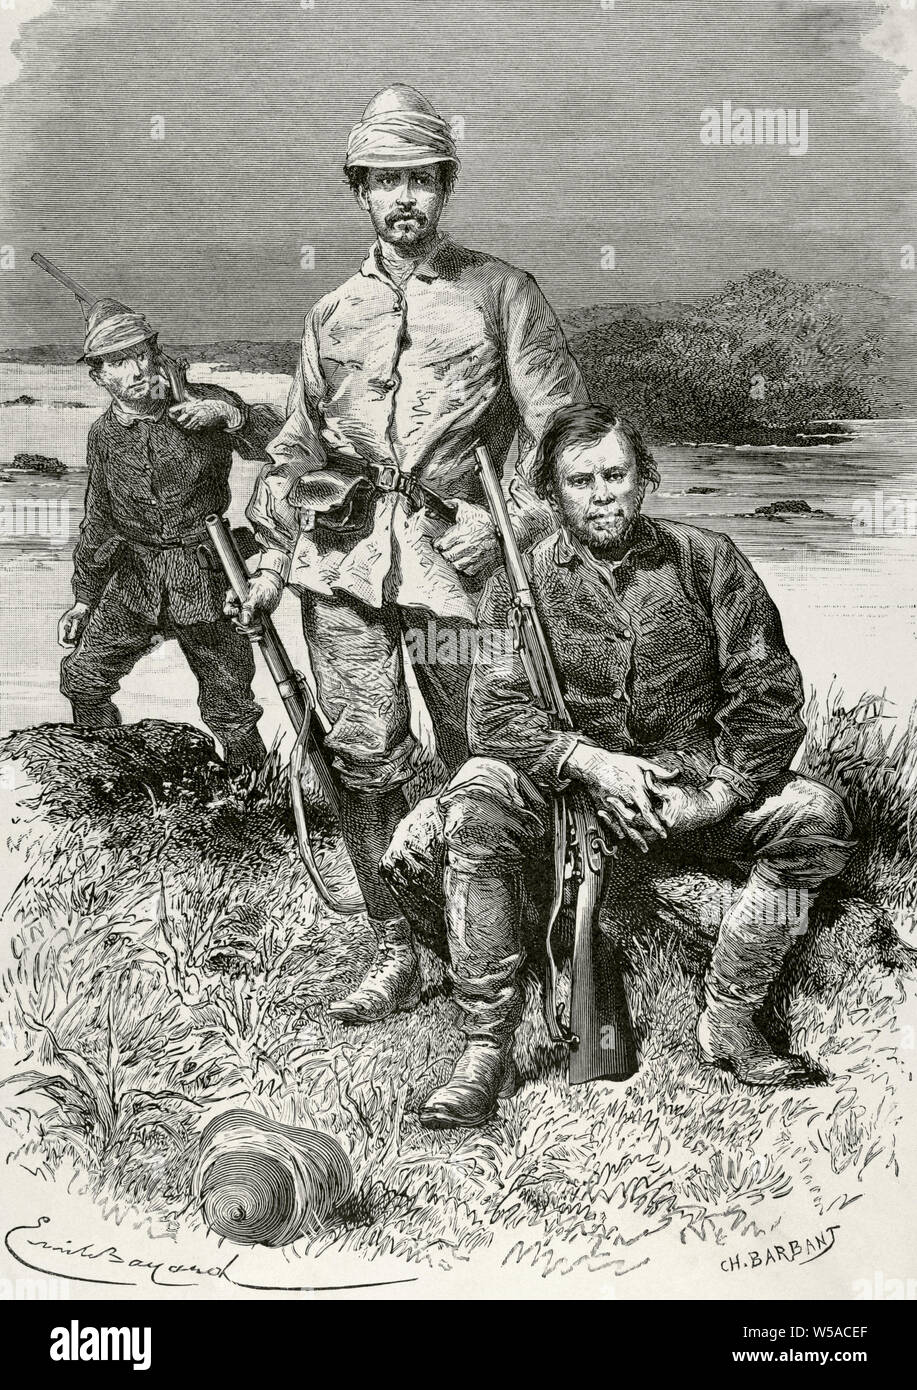 Africa. Members of Stanley's expedition. Edward Pocock, Francis Pocock and Frederick Barker. Illustrated by Emile Bayard. Engraving by Charles Barbant. Africa inexplorada, el Continente Misterioso by Henry Morton Stanley, c. 1887. Stock Photo